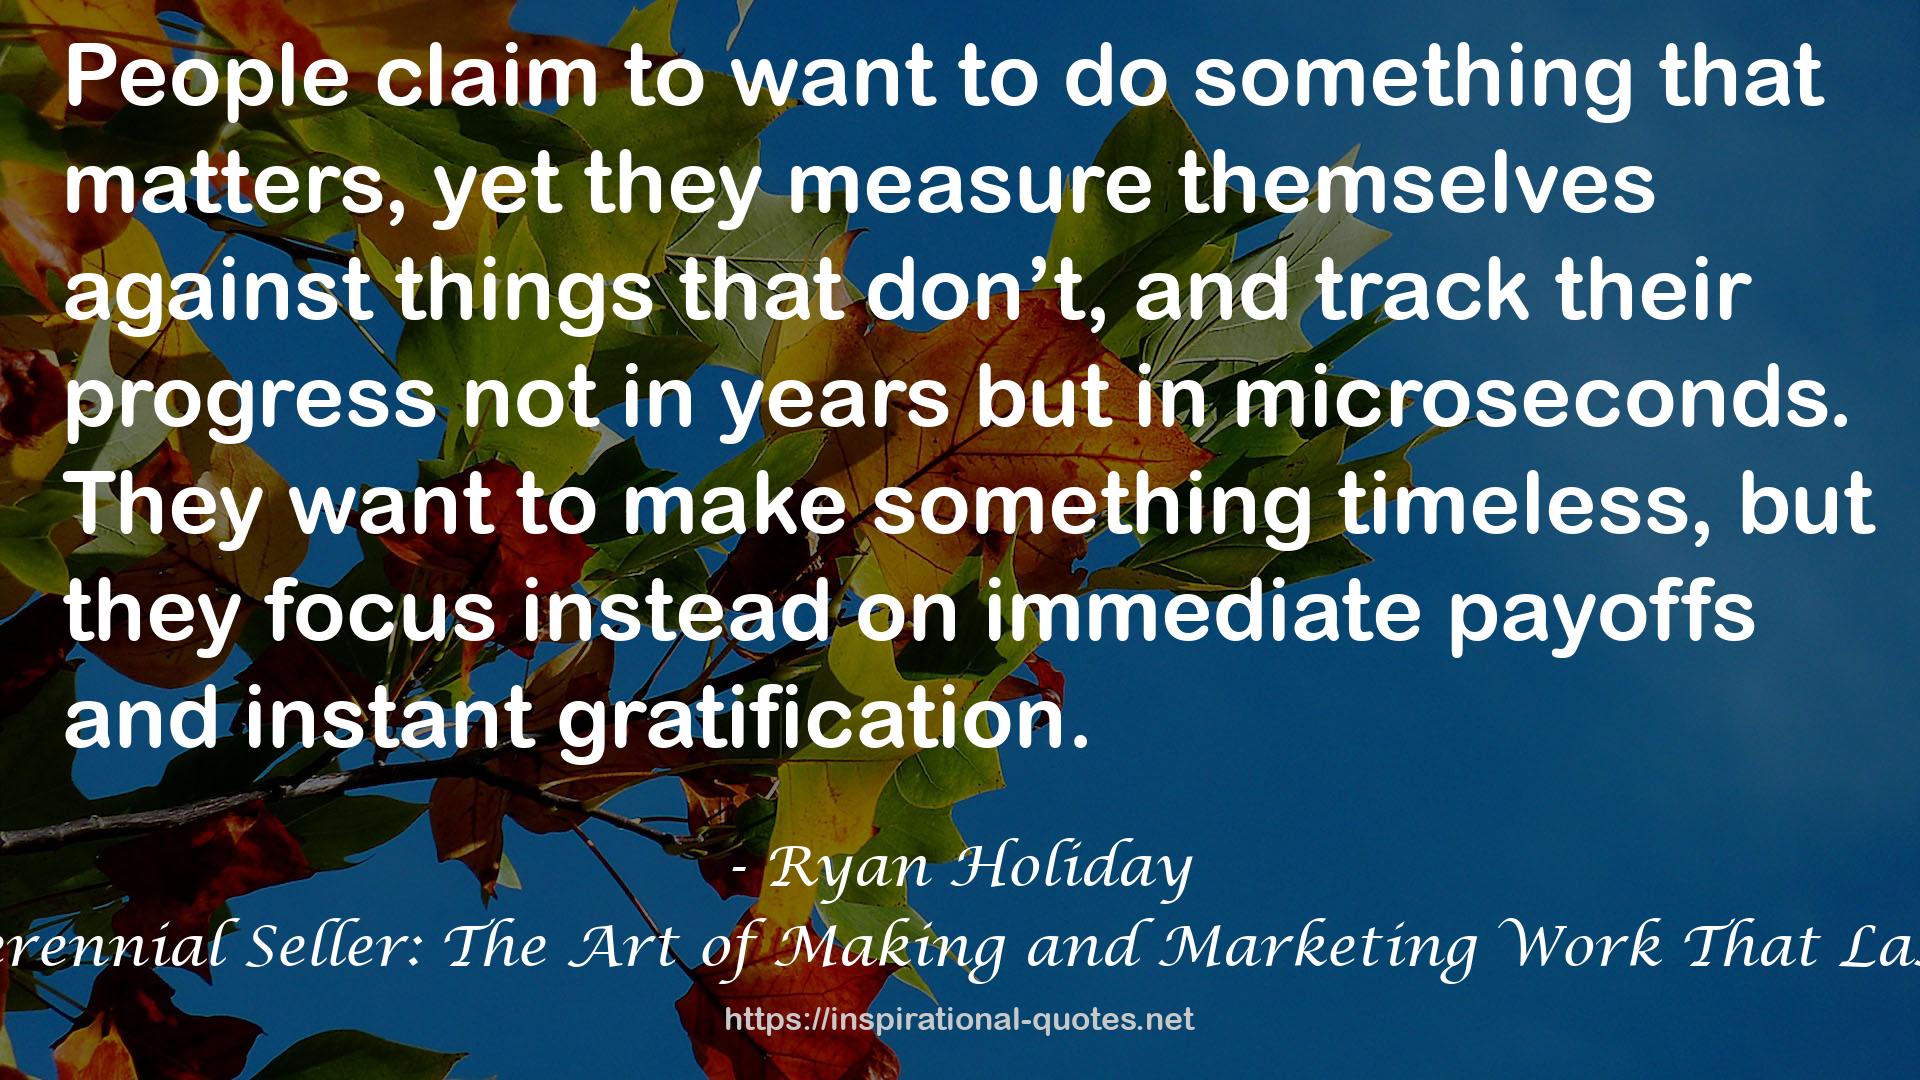 Perennial Seller: The Art of Making and Marketing Work That Lasts QUOTES